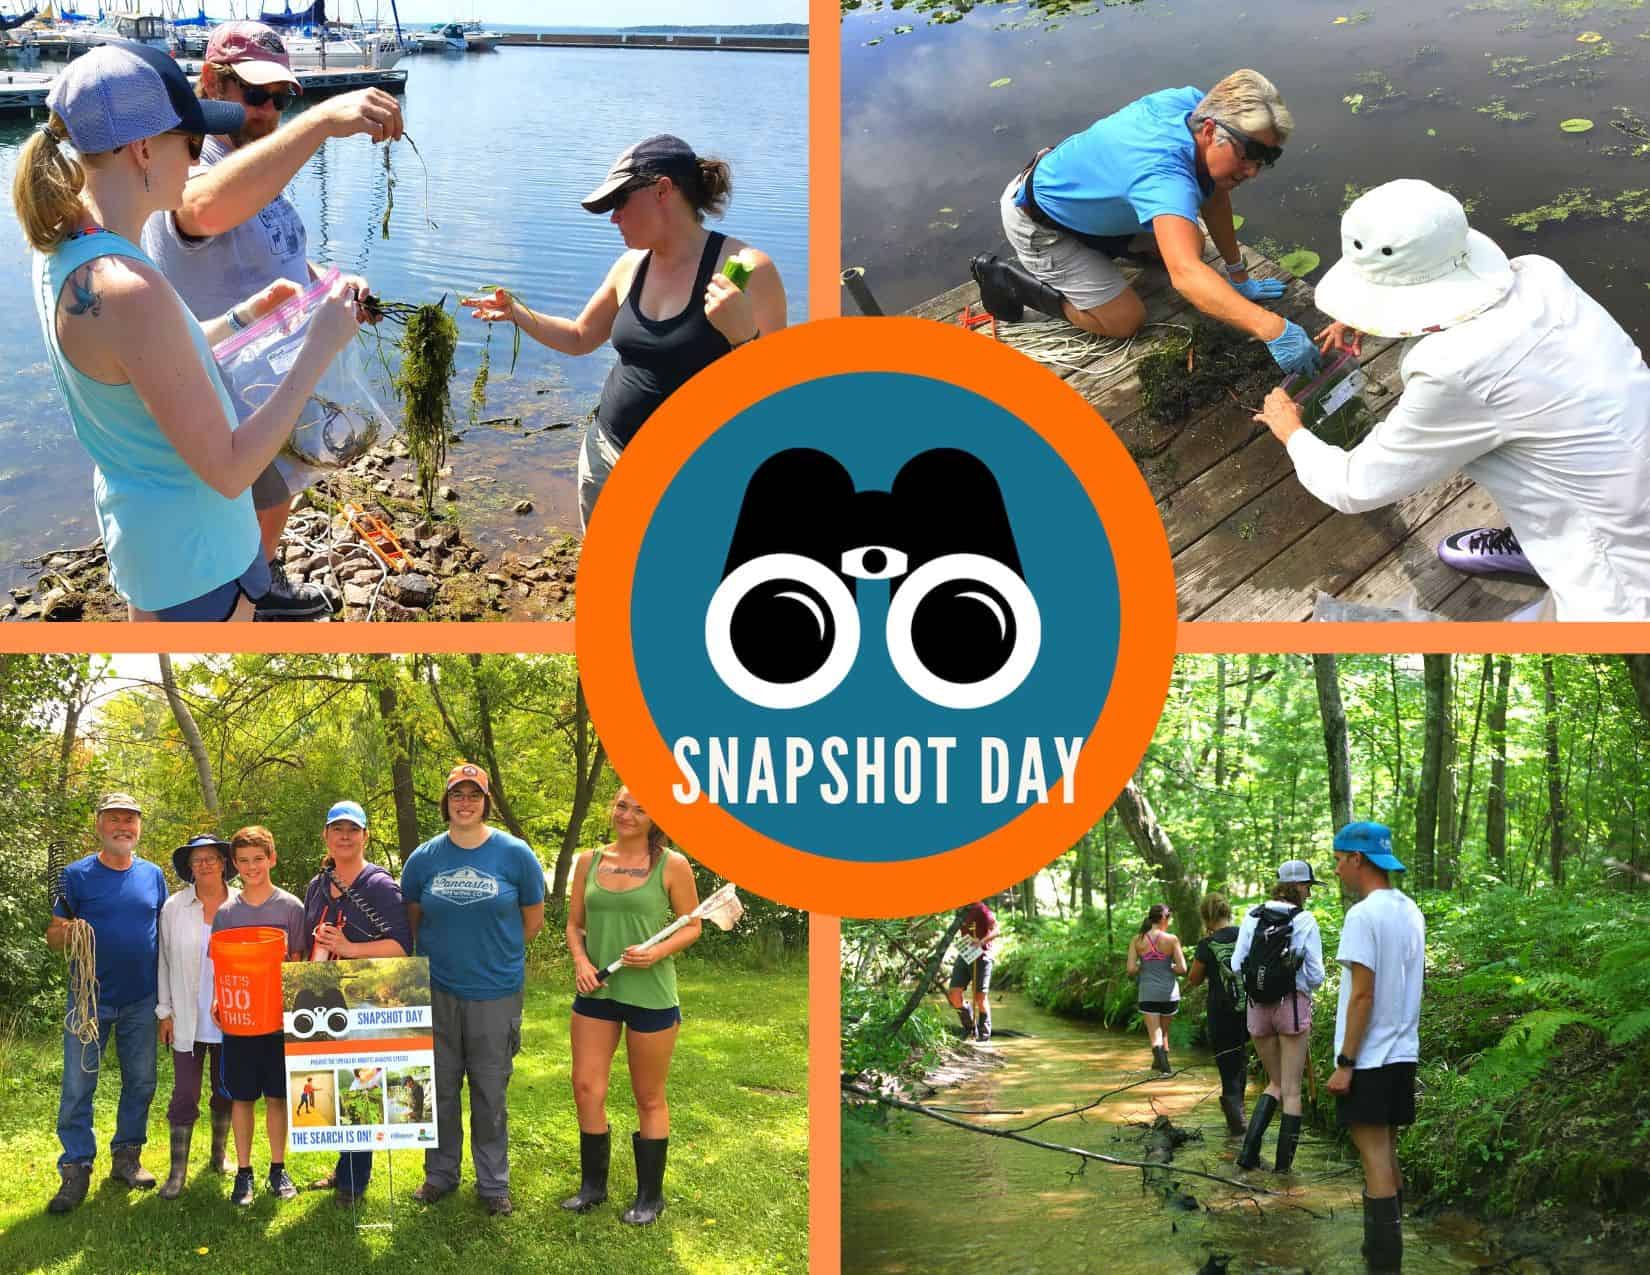 Public invited to join Lincoln, Oneida County AIS teams in Snapshot Day event